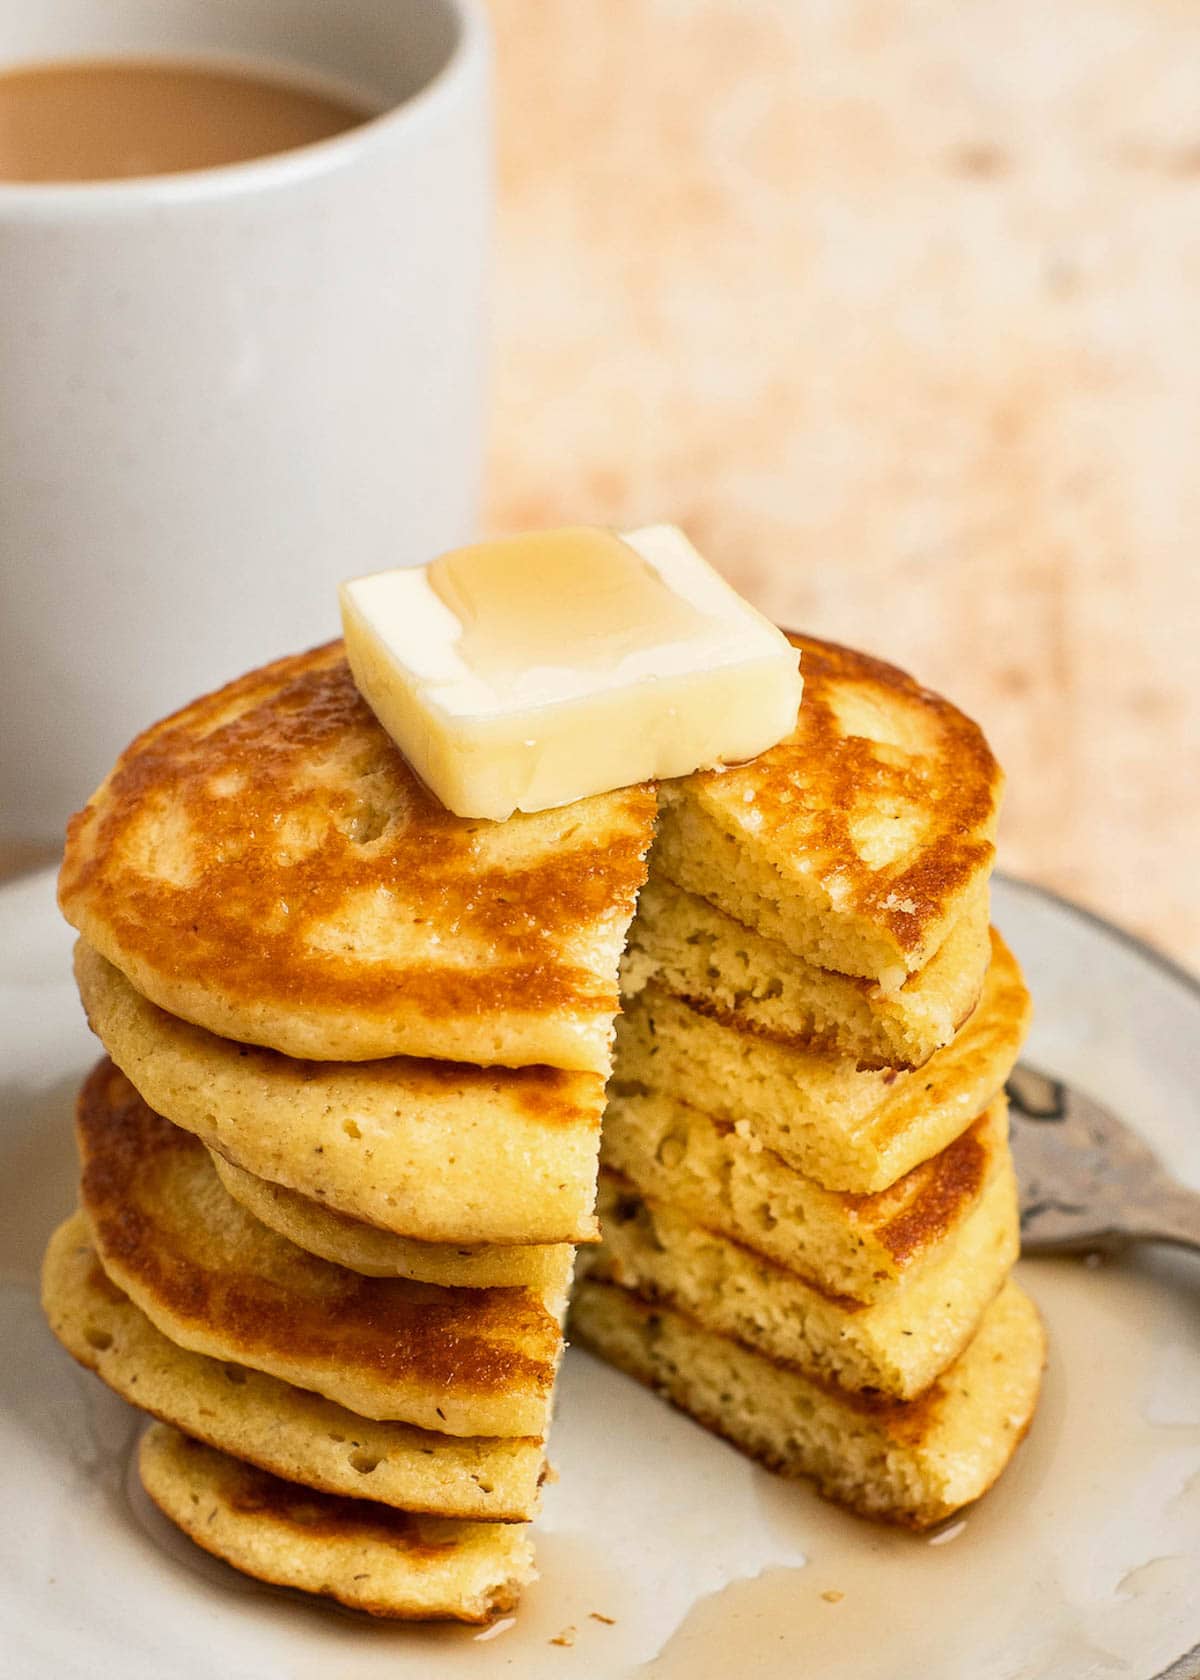 Stack of pancakes on plate with coffee